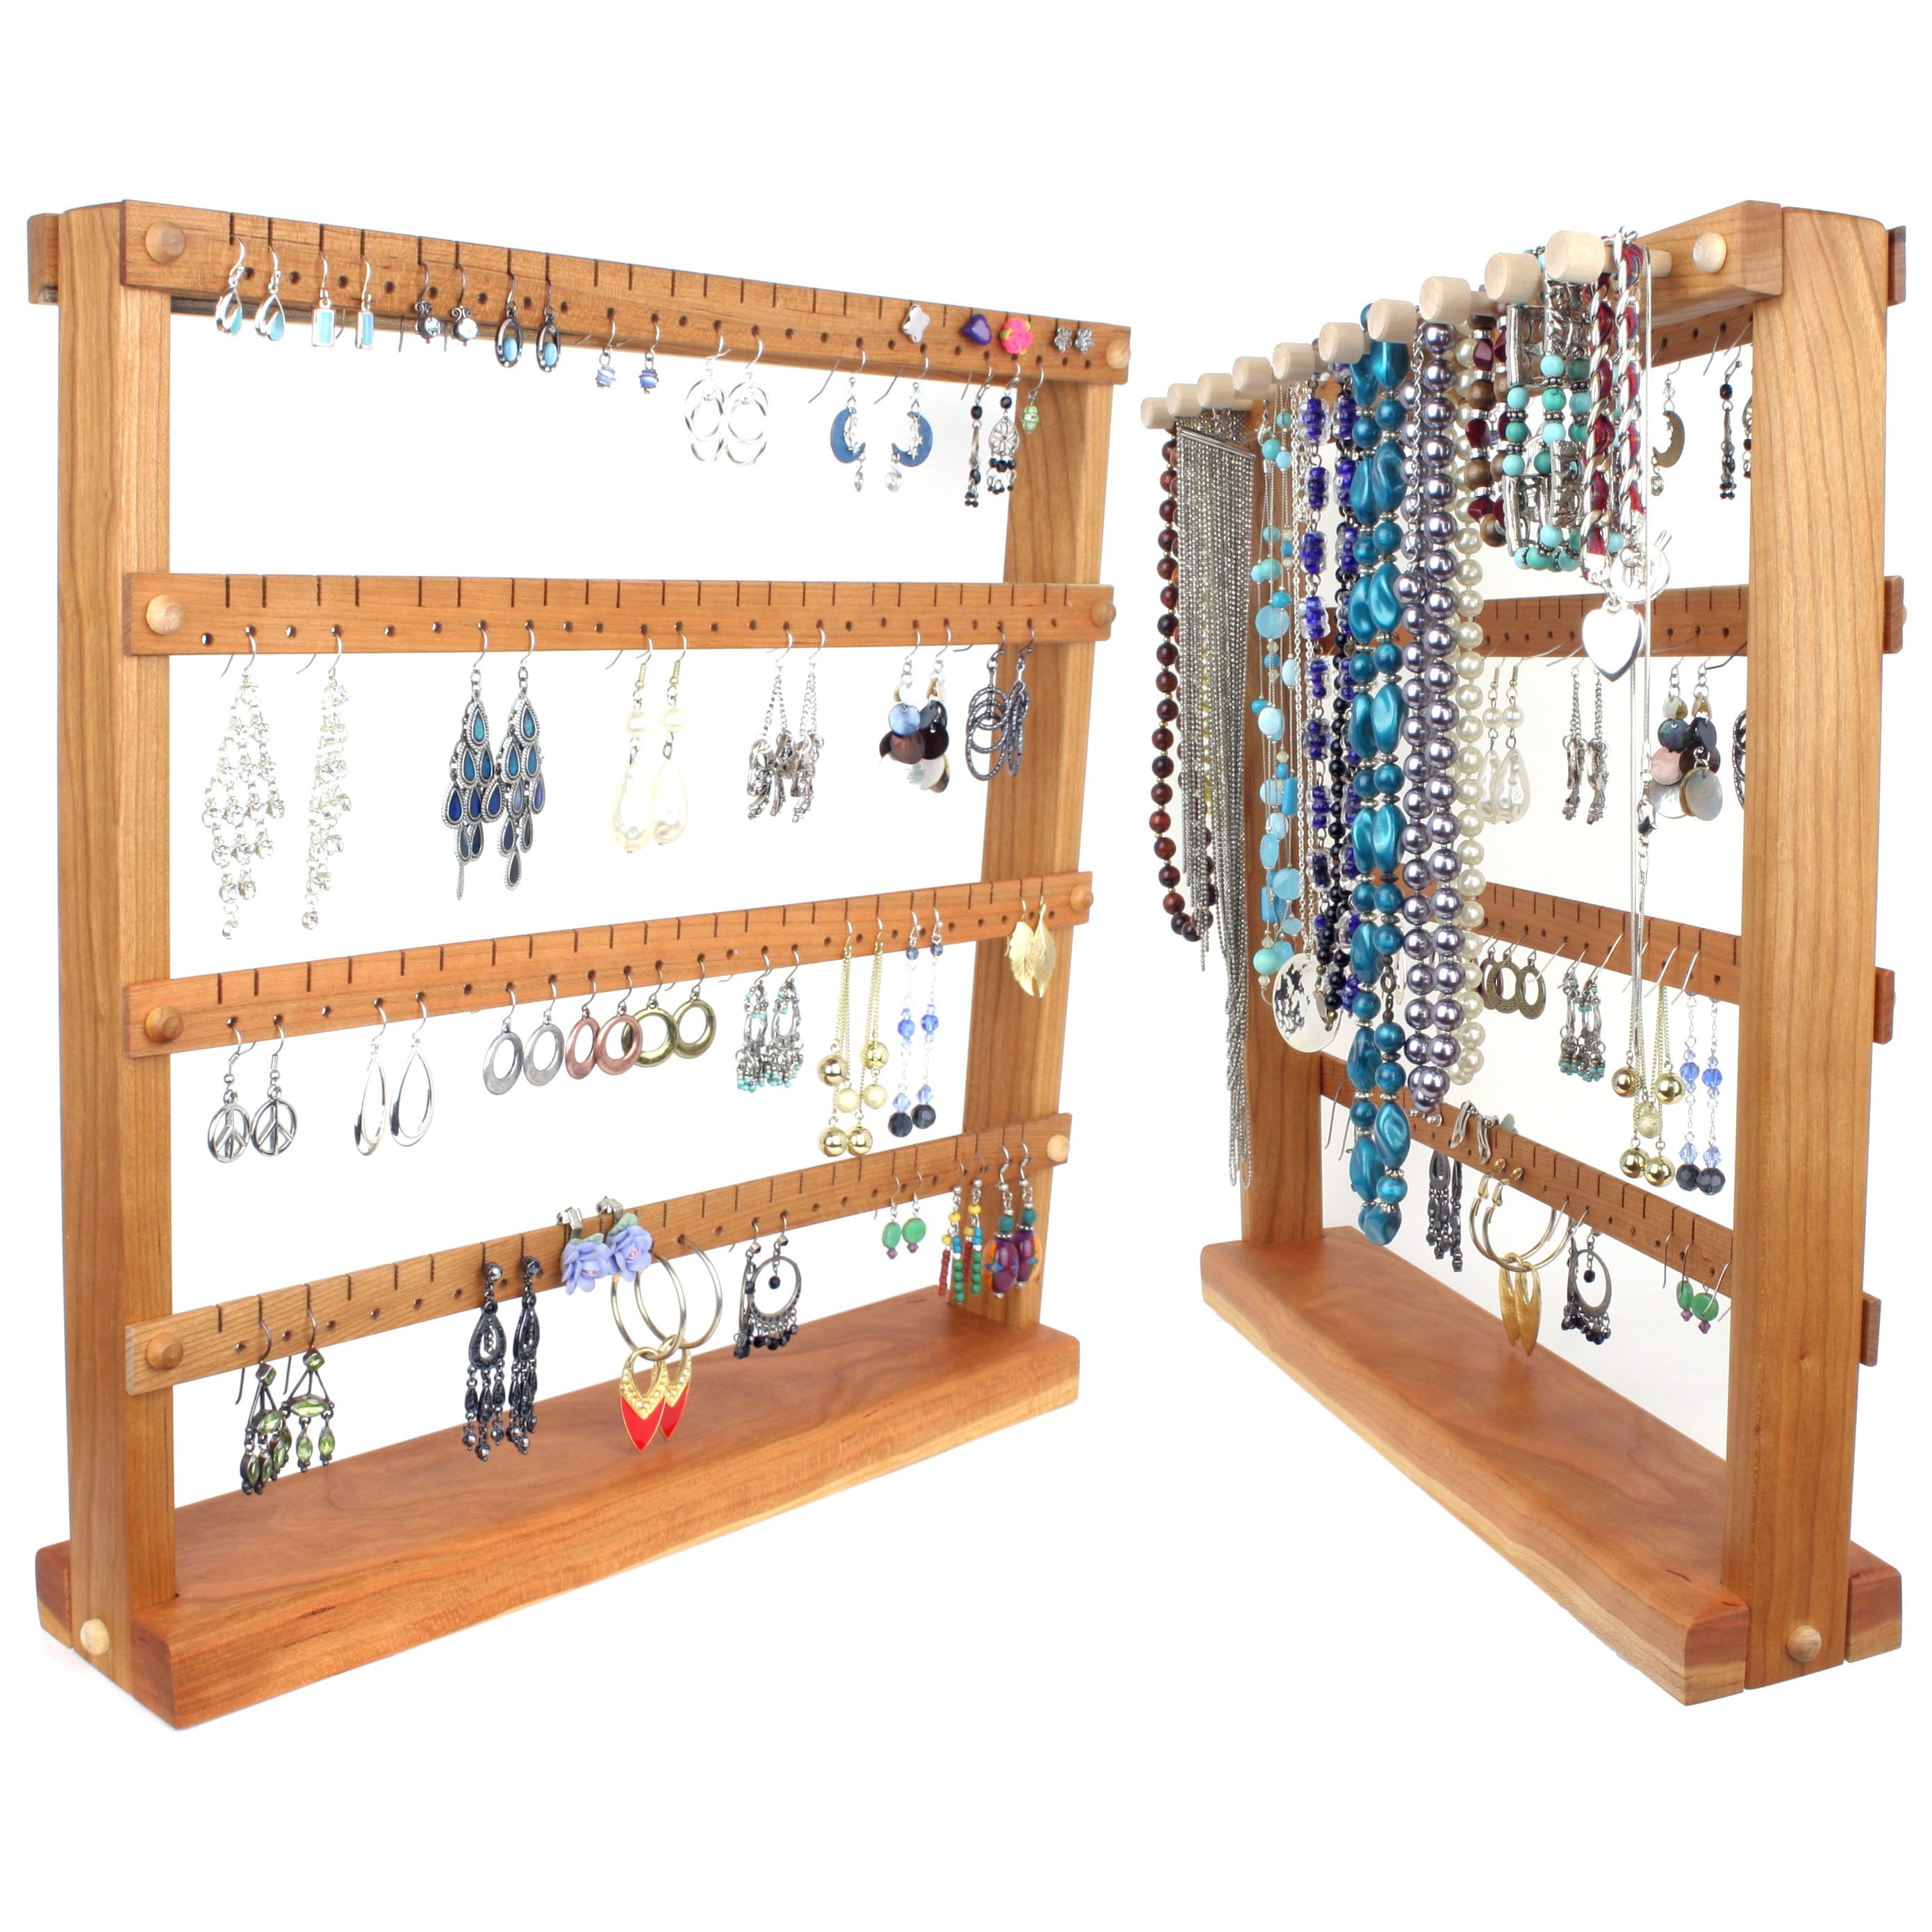  Ikee Design Wood Jewelry Holder Organizer Stand, Earring  Bracelet Jewelry Display Stands, Jewelry Organizer with 18 Hooks and  Removable Holders, Necklace Organizer, Bracelet Holder, Black Color :  Clothing, Shoes & Jewelry